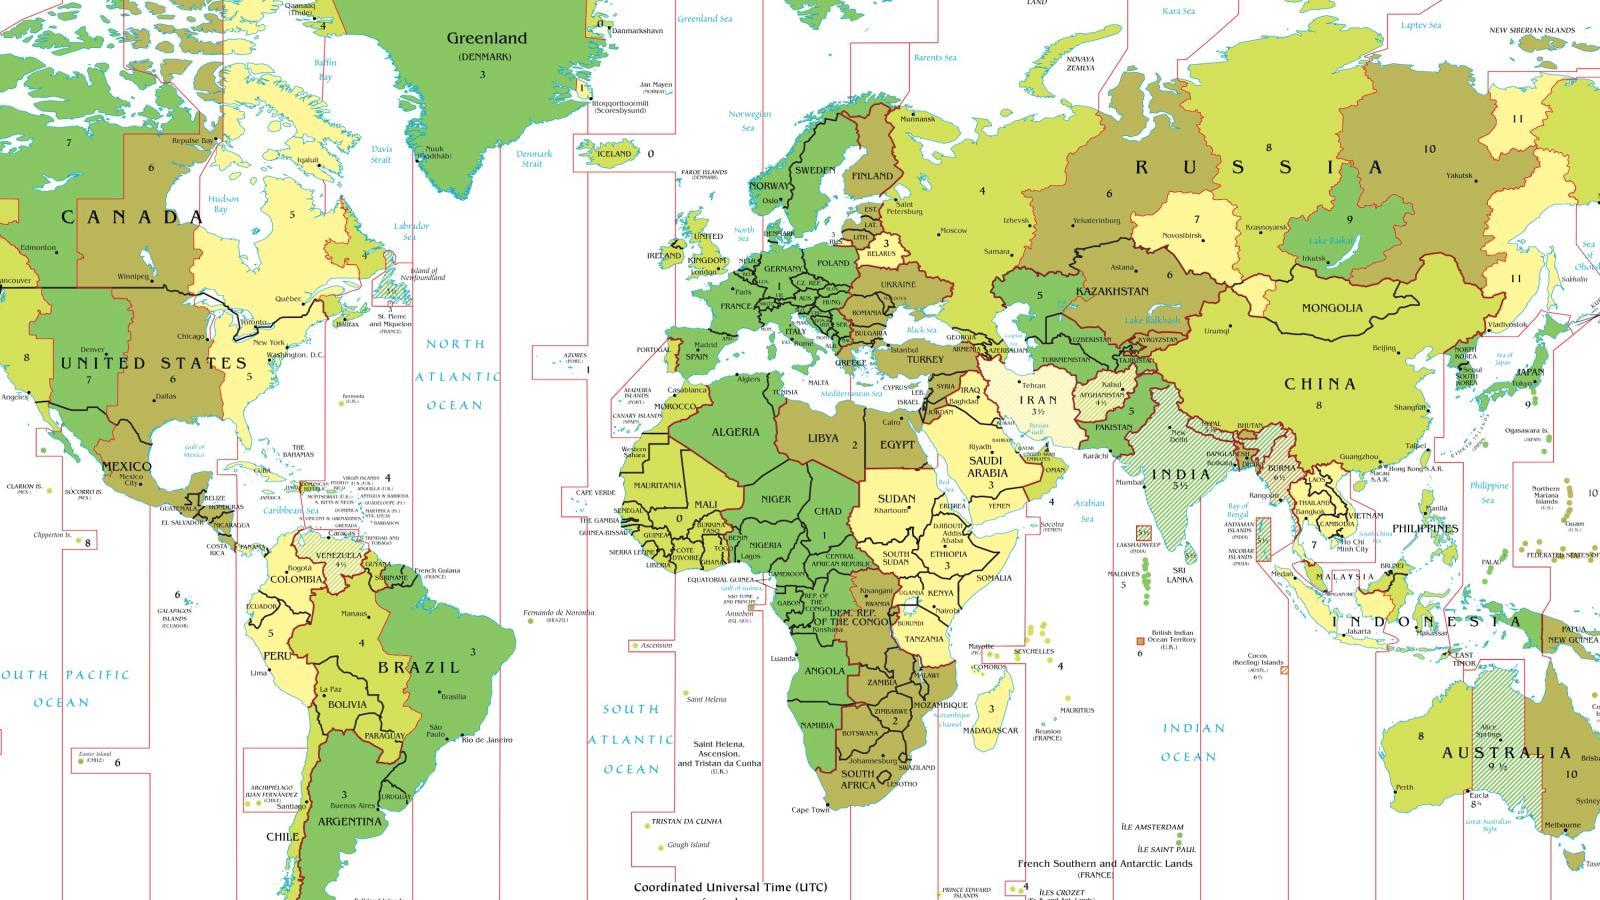 Time Zone Deviants, Part I: the strangest time zones in the world